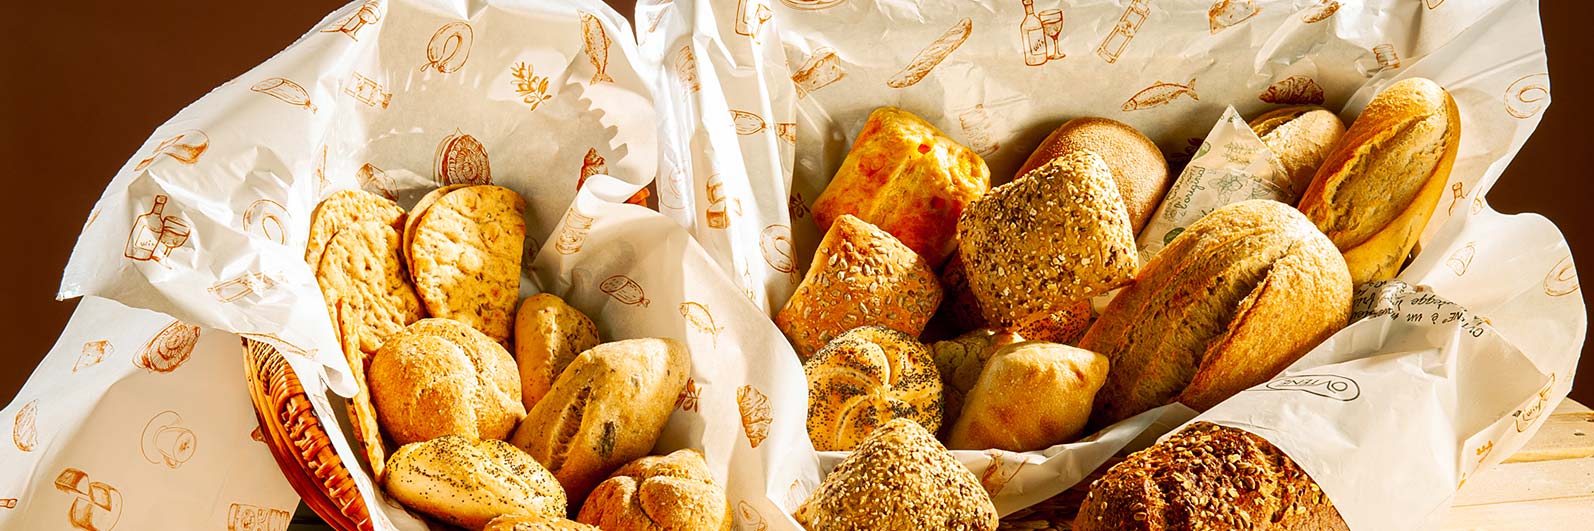 Suppliers of Eco-Friendly Bakery Packaging Solutions